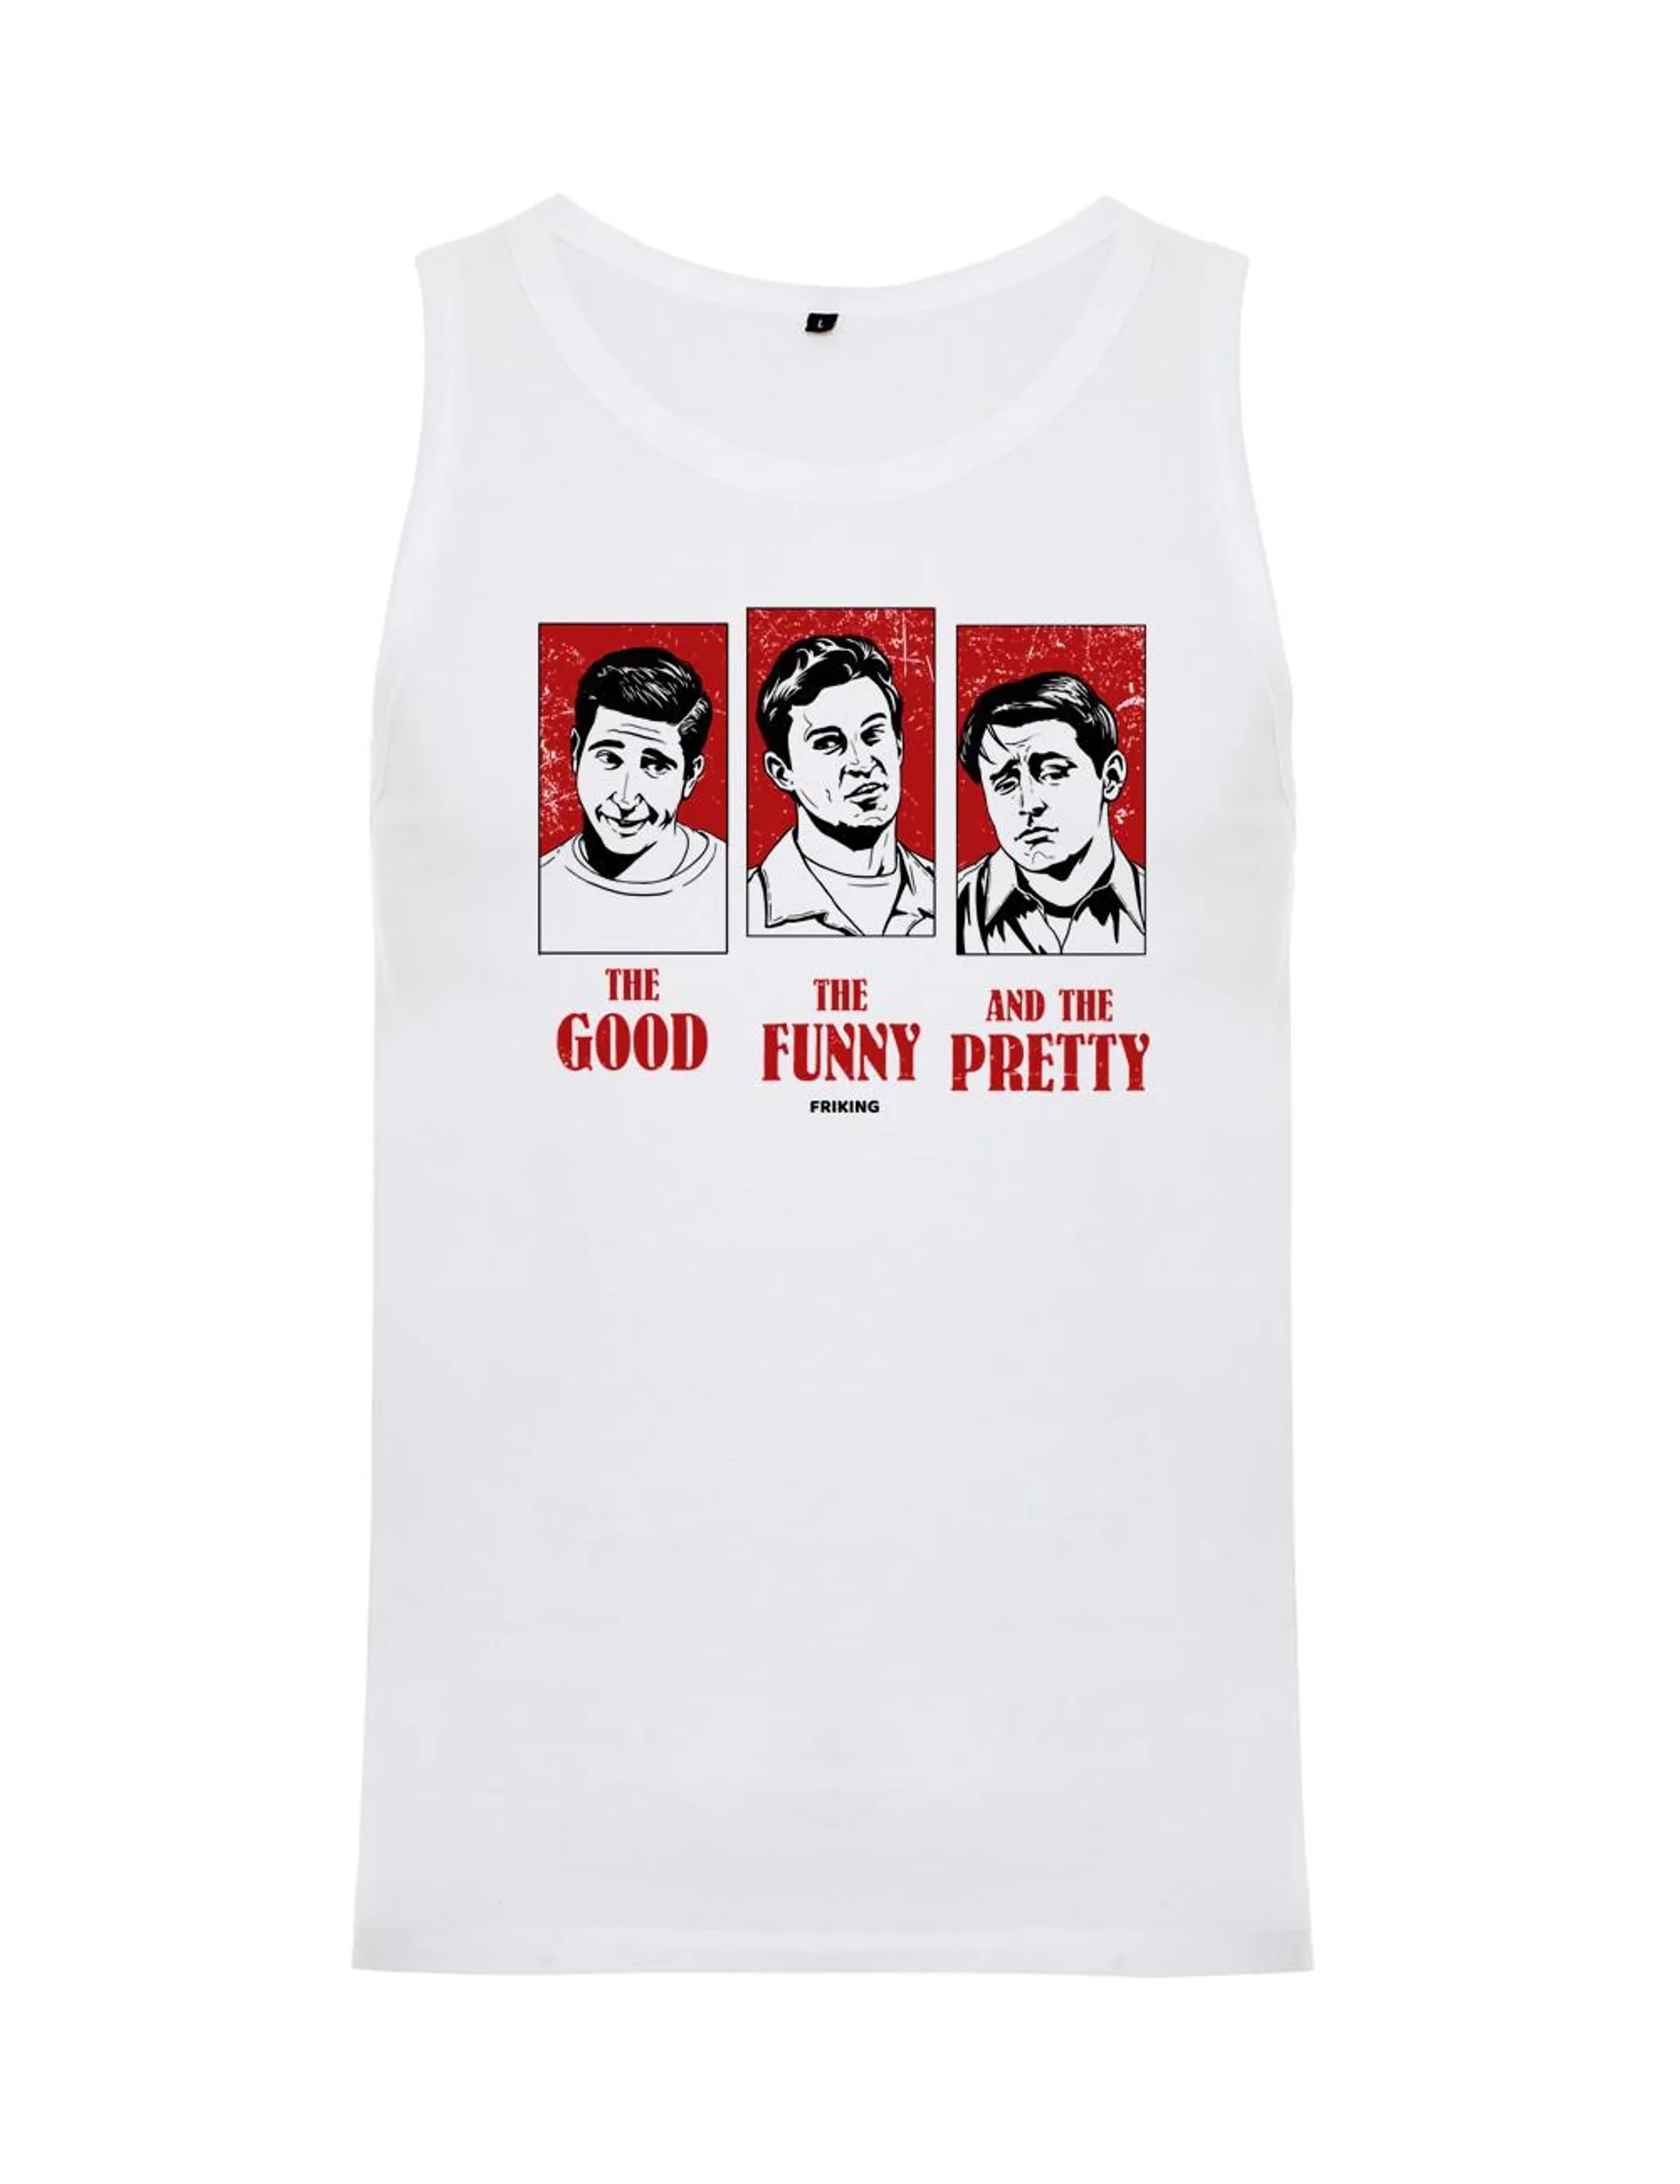 CAMISETA HOMBRE TIRANTES The good the funny and the pretty